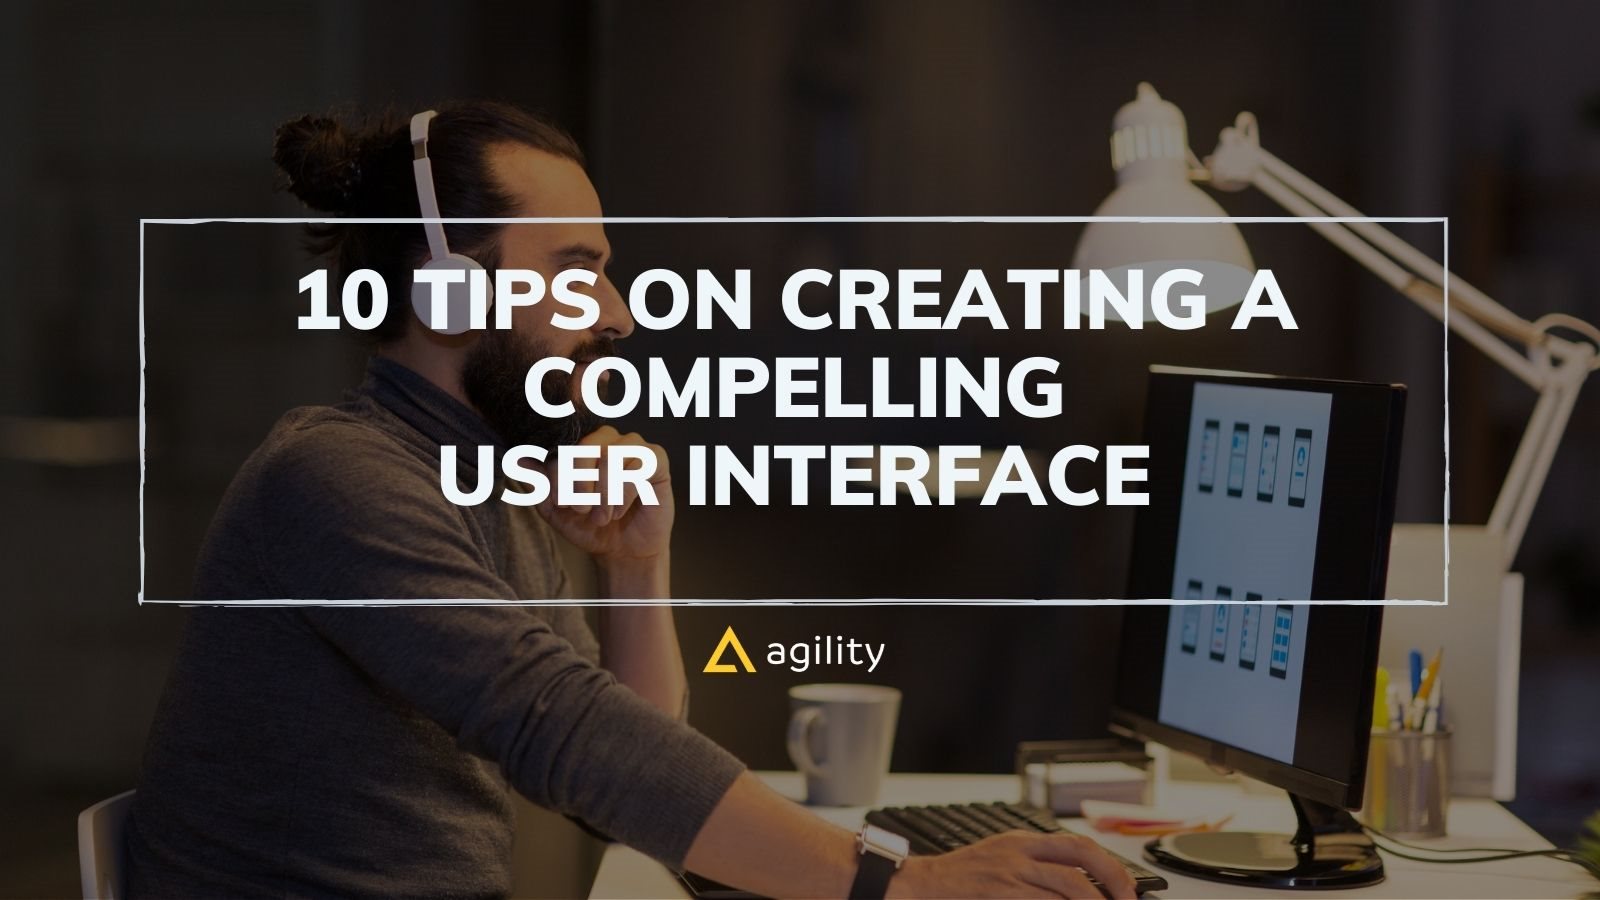 10 Tips on Creating a Compelling User Interface